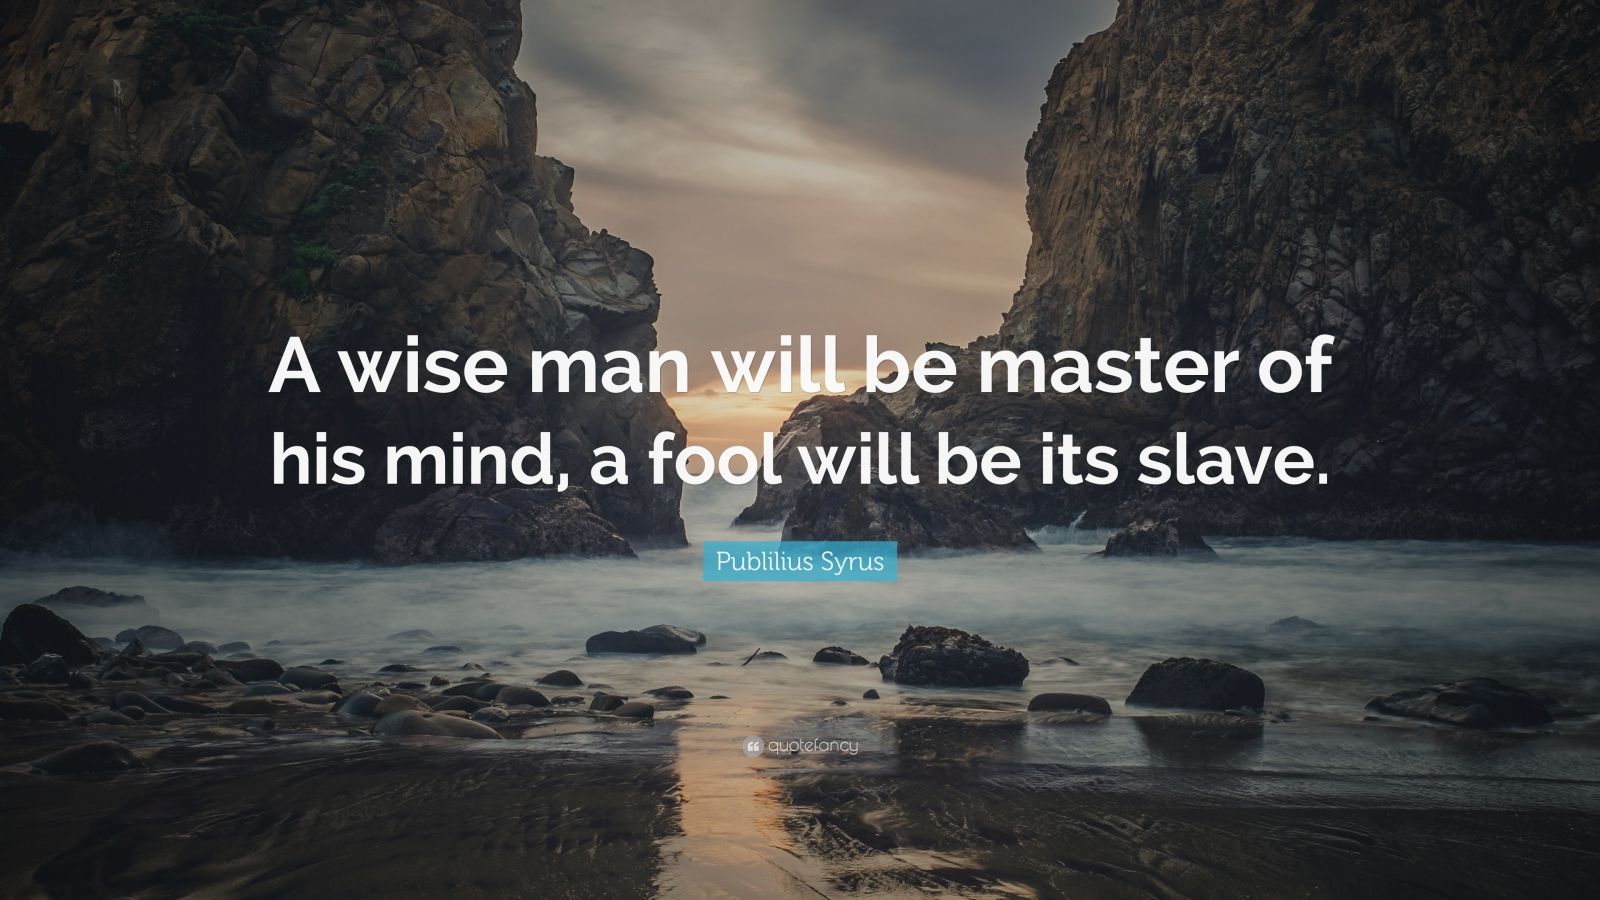 Publilius Syrus Quote: “A wise man will be master of his mind, a fool ...